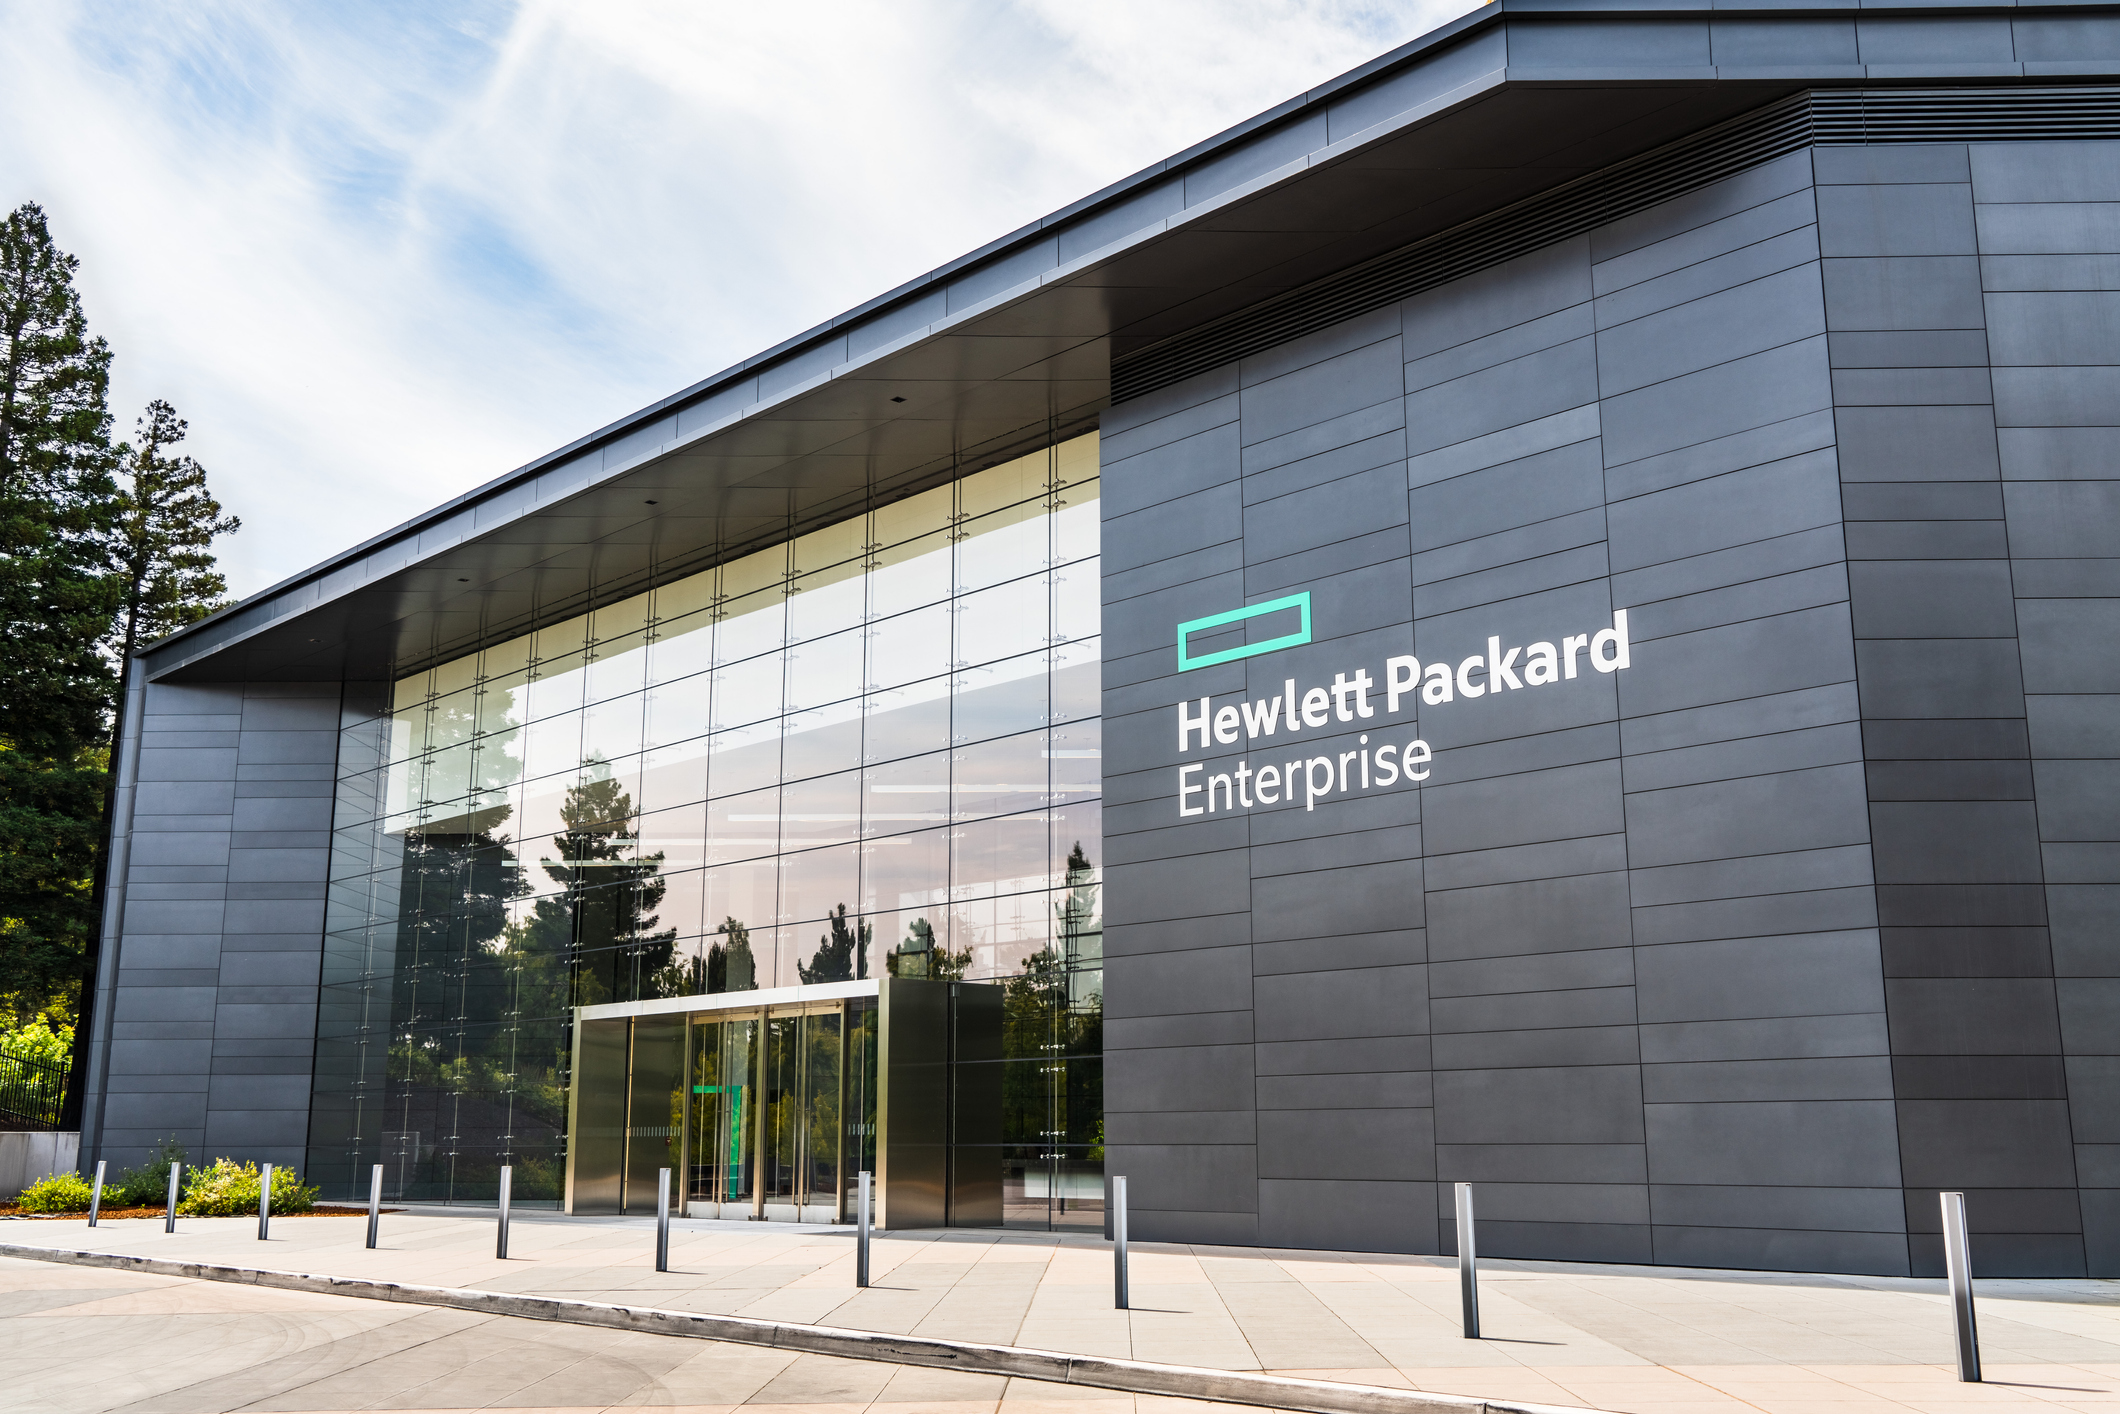 Hewlett Packard Enterprise (HPE) corporate headquarters located in Silicon Valley